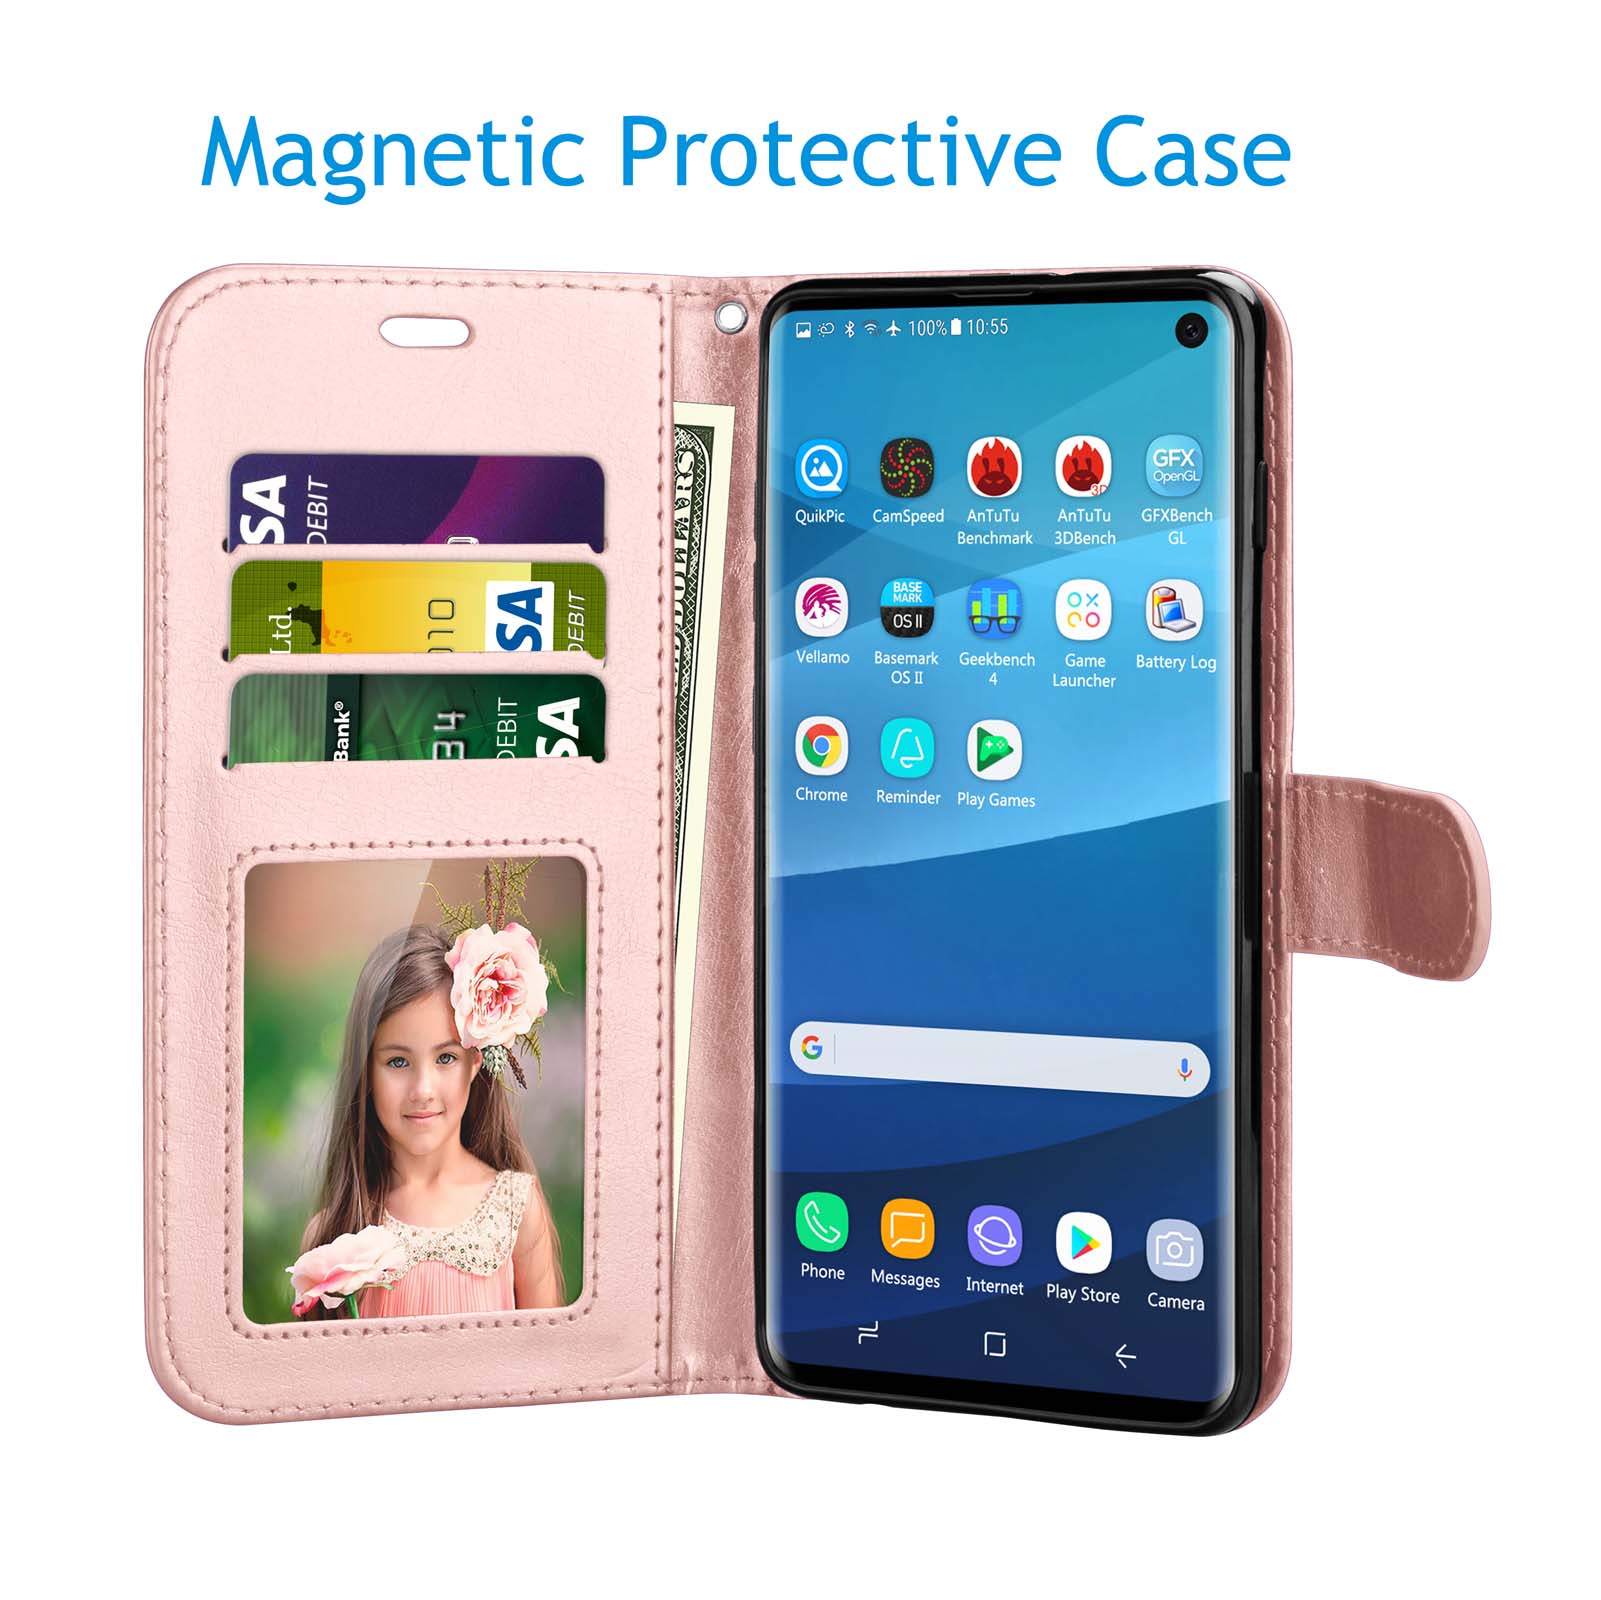 Tekcoo Galaxy S10 / S10 Plus / S10E Wallet Case, for Galaxy S10 / S10+ / S10e Case, Tekcoo [Rose Gold] PU Leather [3 Card Slots] ID Credit Flip Cover [Kickstand] Cover & Wrist Strap - image 3 of 5